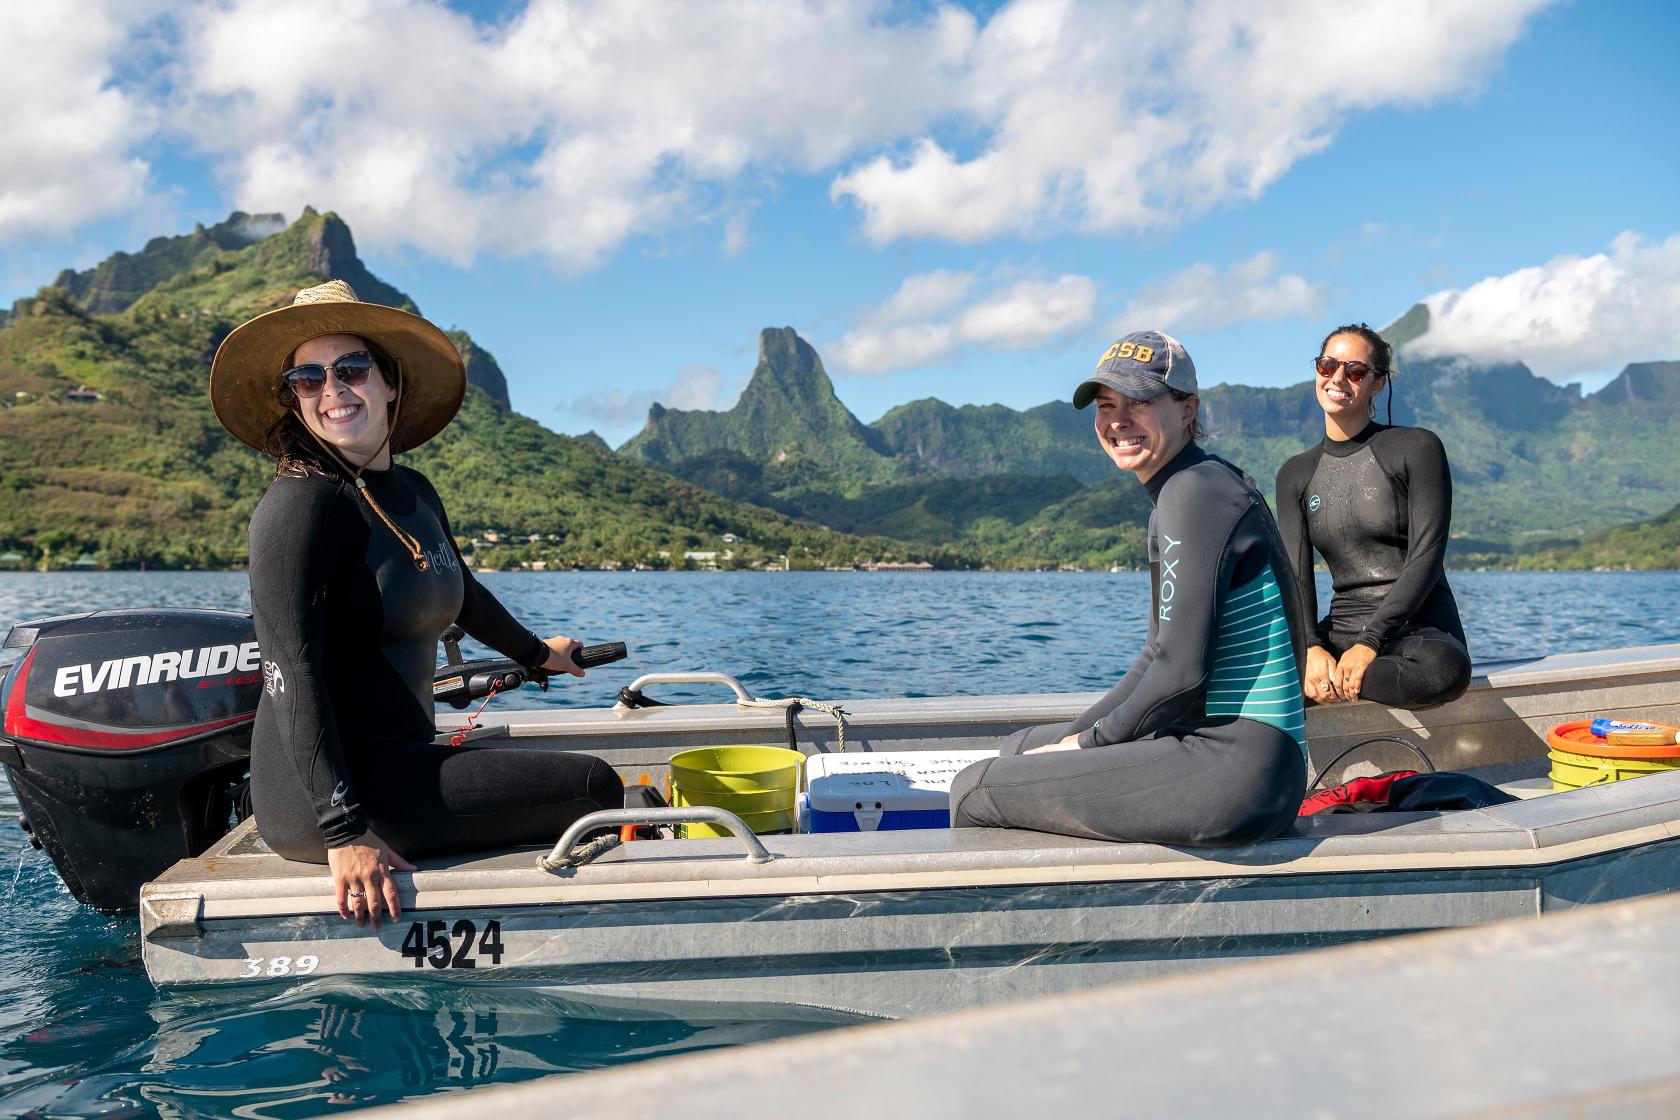 Two student researchers on motorboat in Moorea